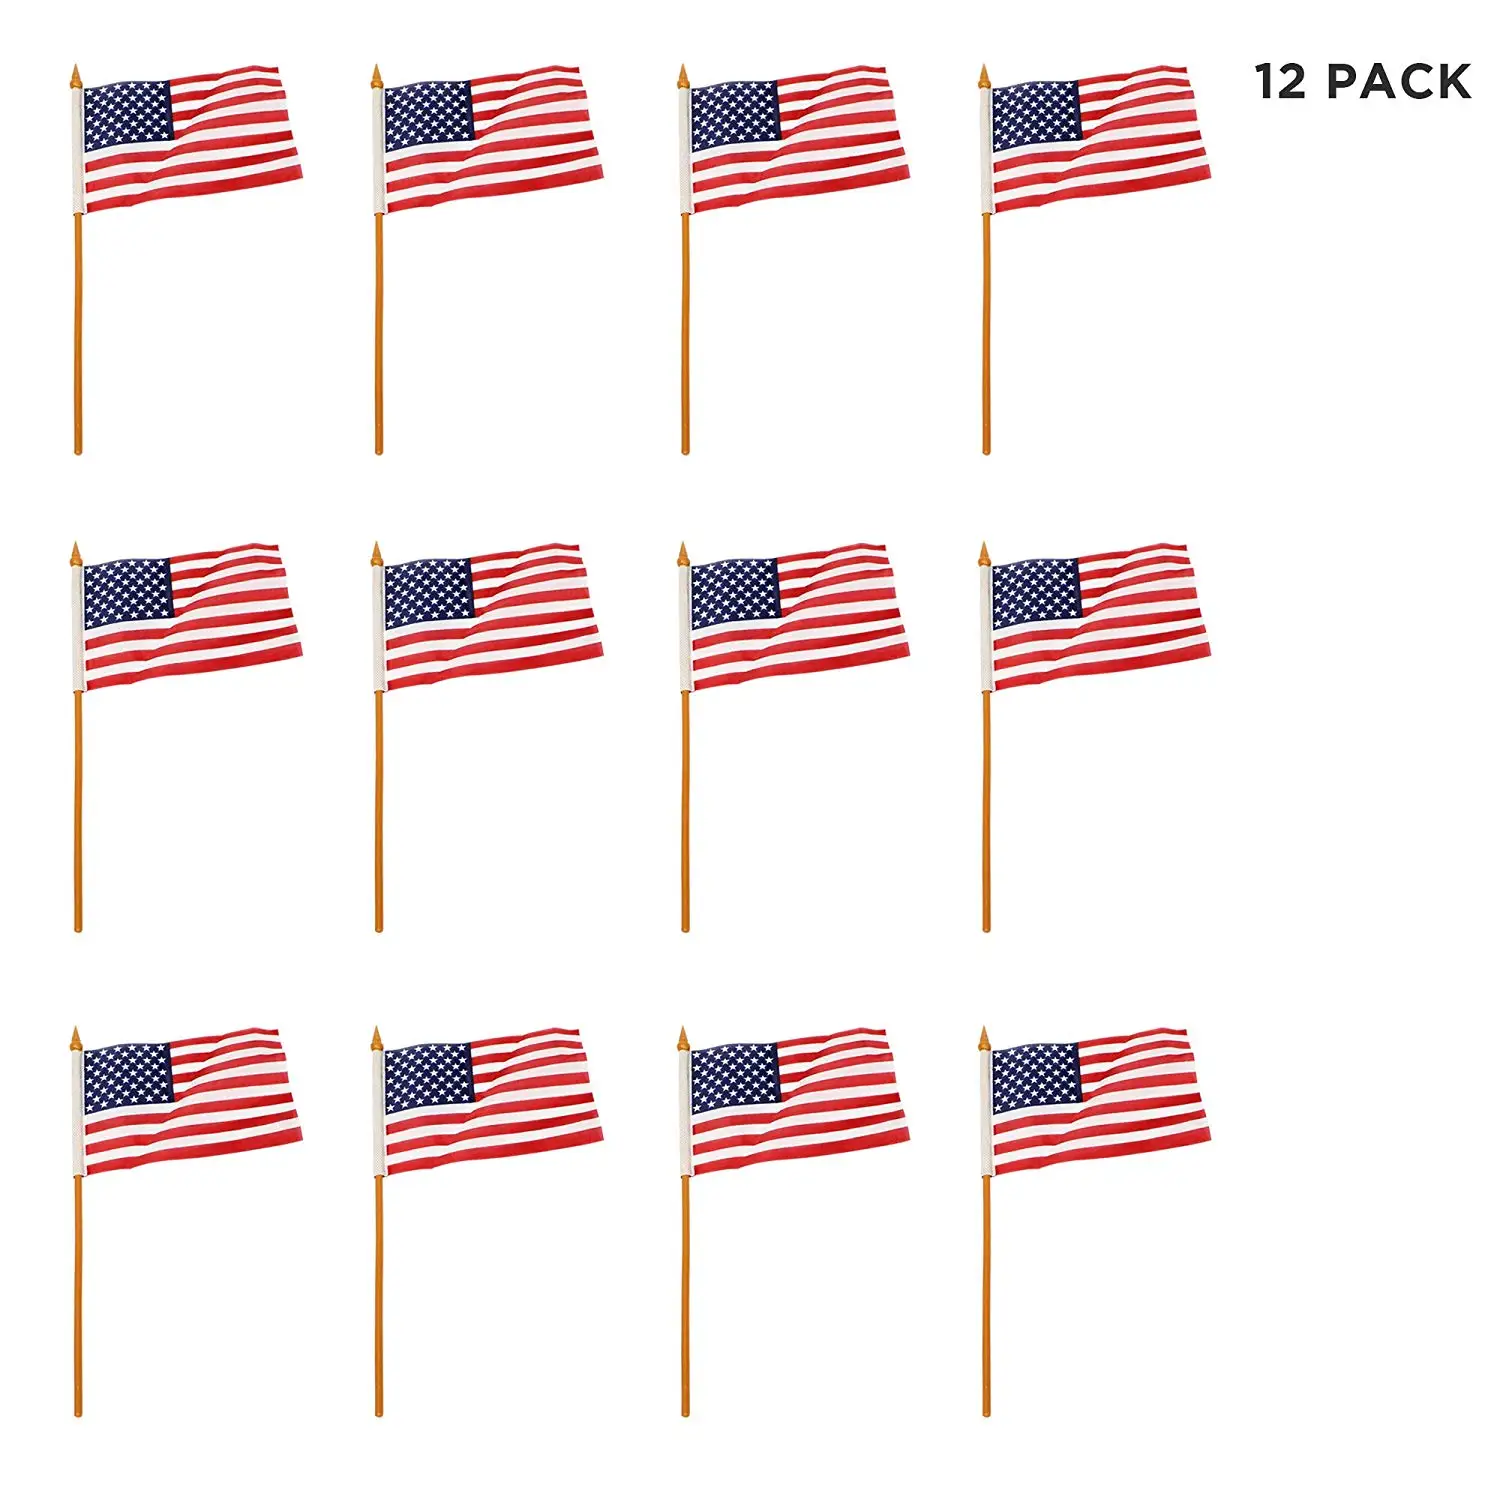 Box of 12 Gadsden Historical Flag 4x6 Miniature Desk & Table Flags Includes 12 Flag Stands & 12 DONT TREAD ON ME Small Mini Stick Flags Made in the USA! 